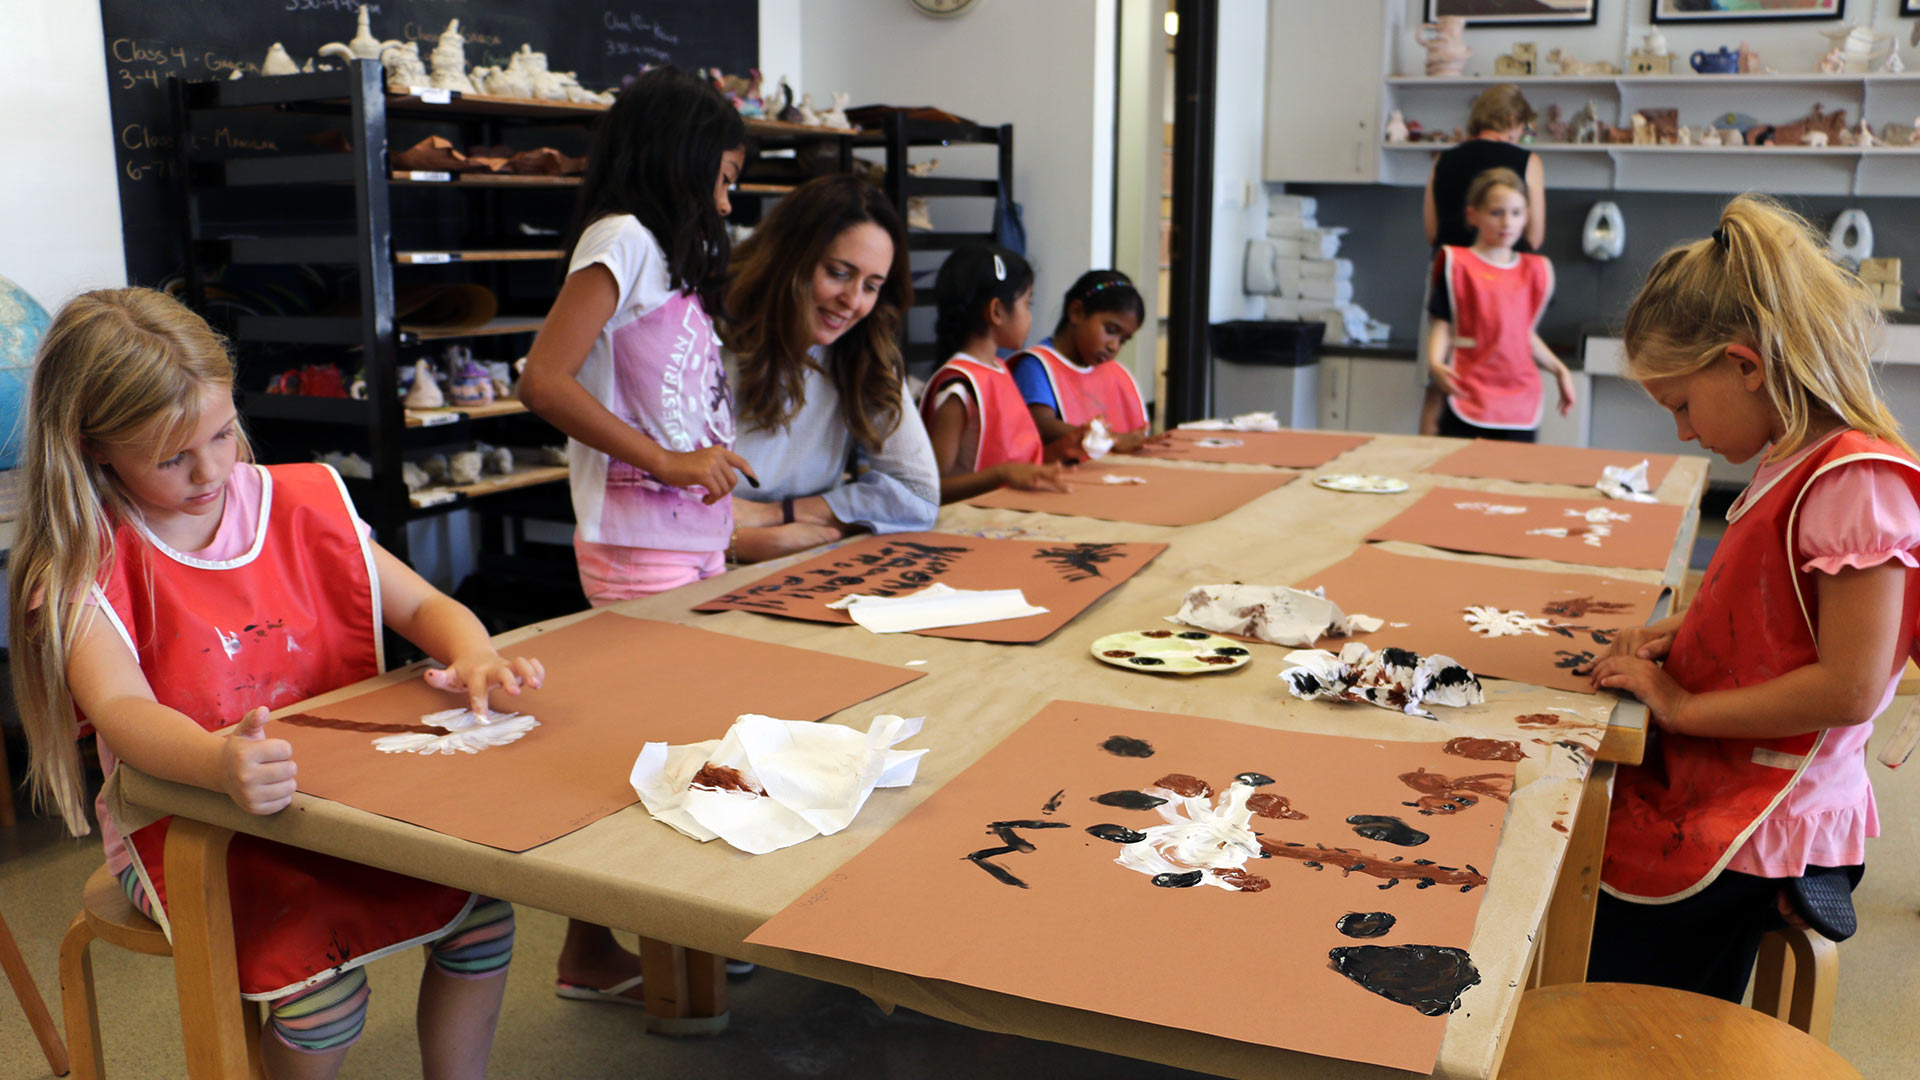 Elementary students participating in an art project with an instructor